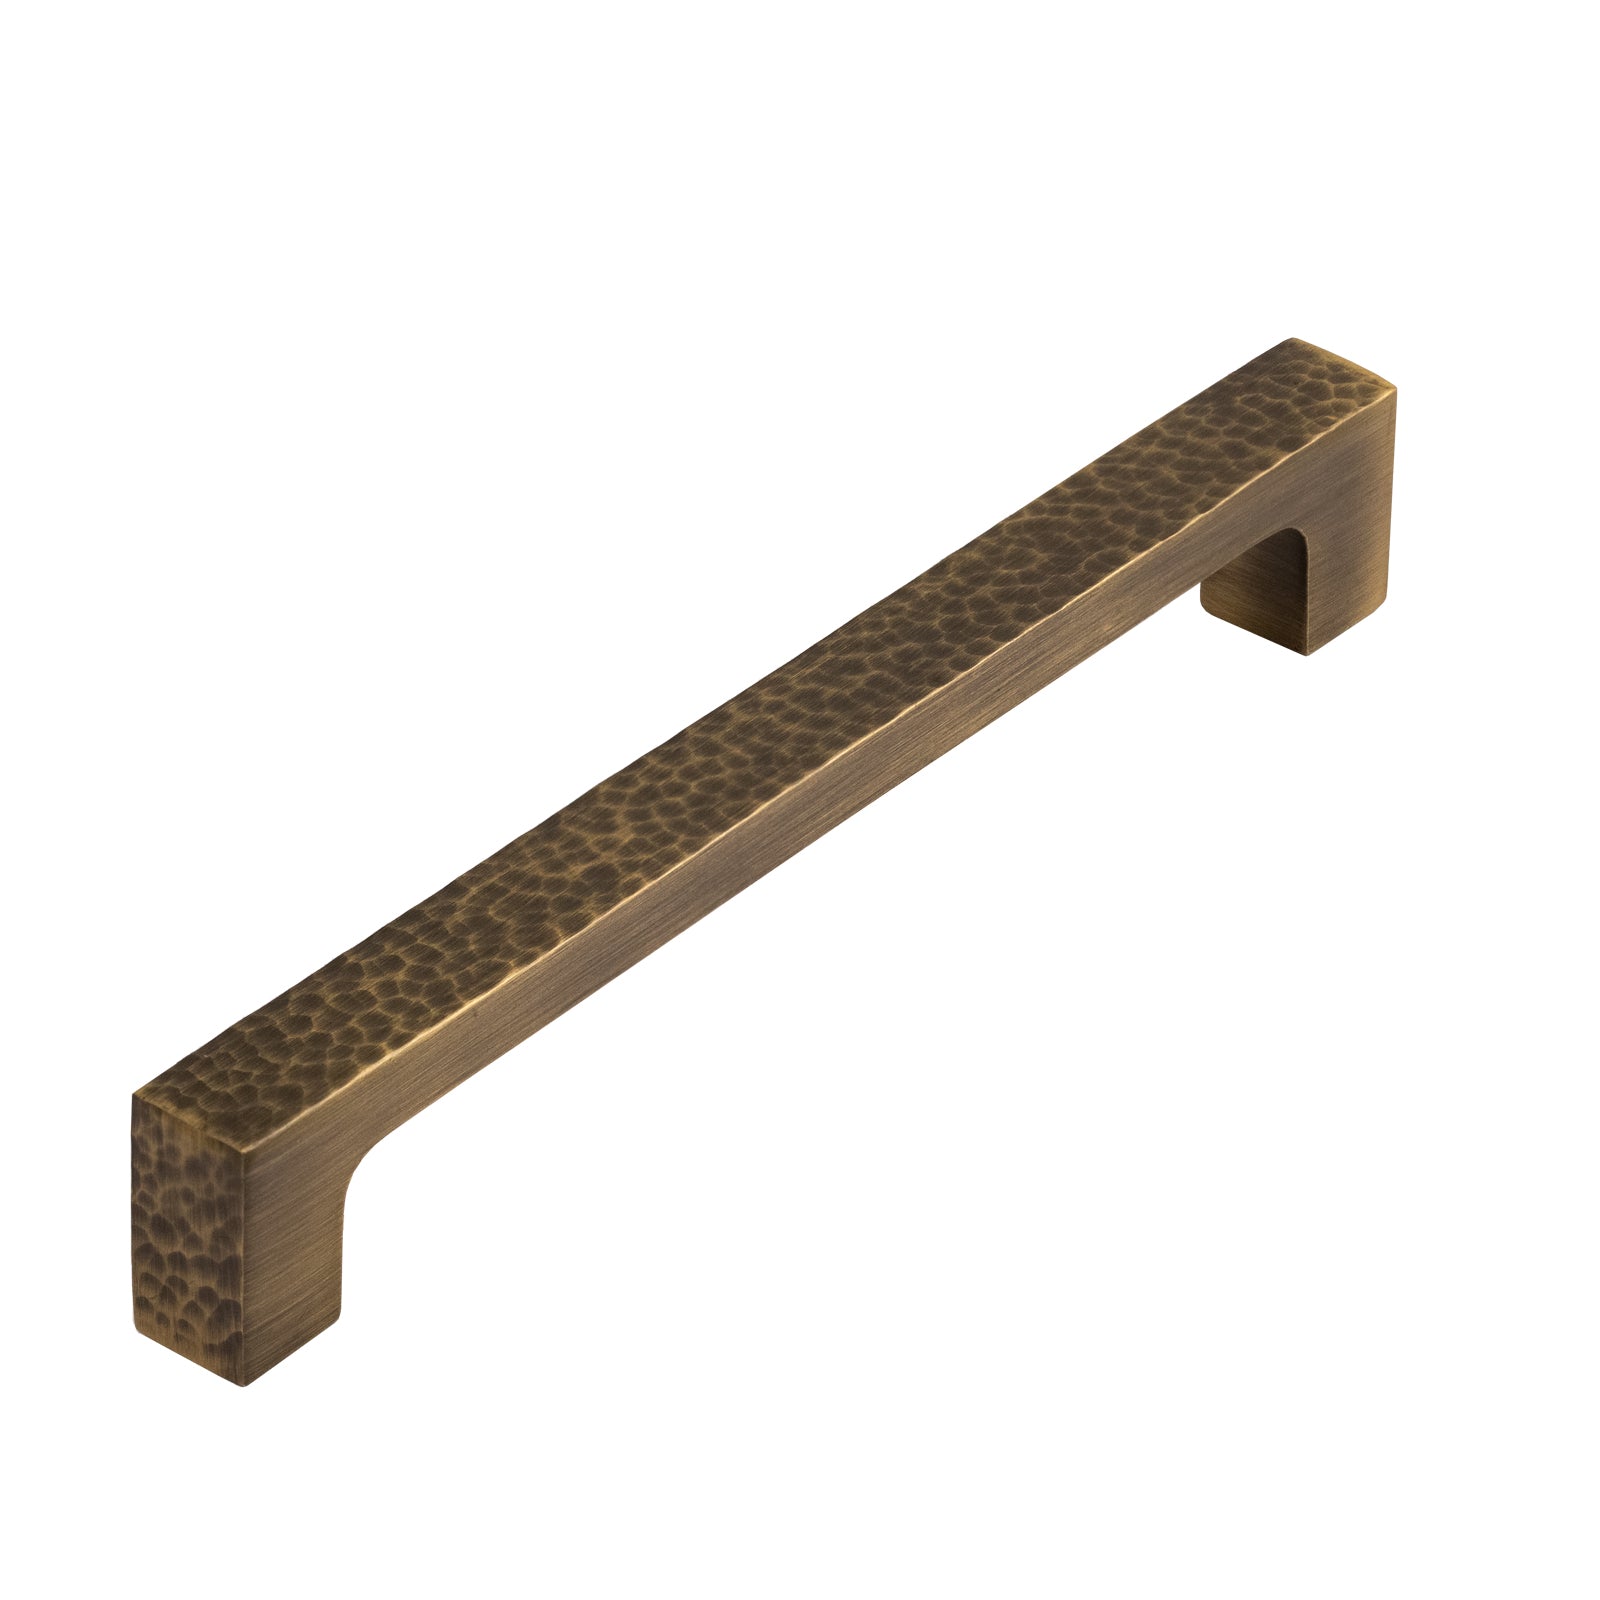 Hammered Square Pull Handles in Antique Brass 175mm SHOW